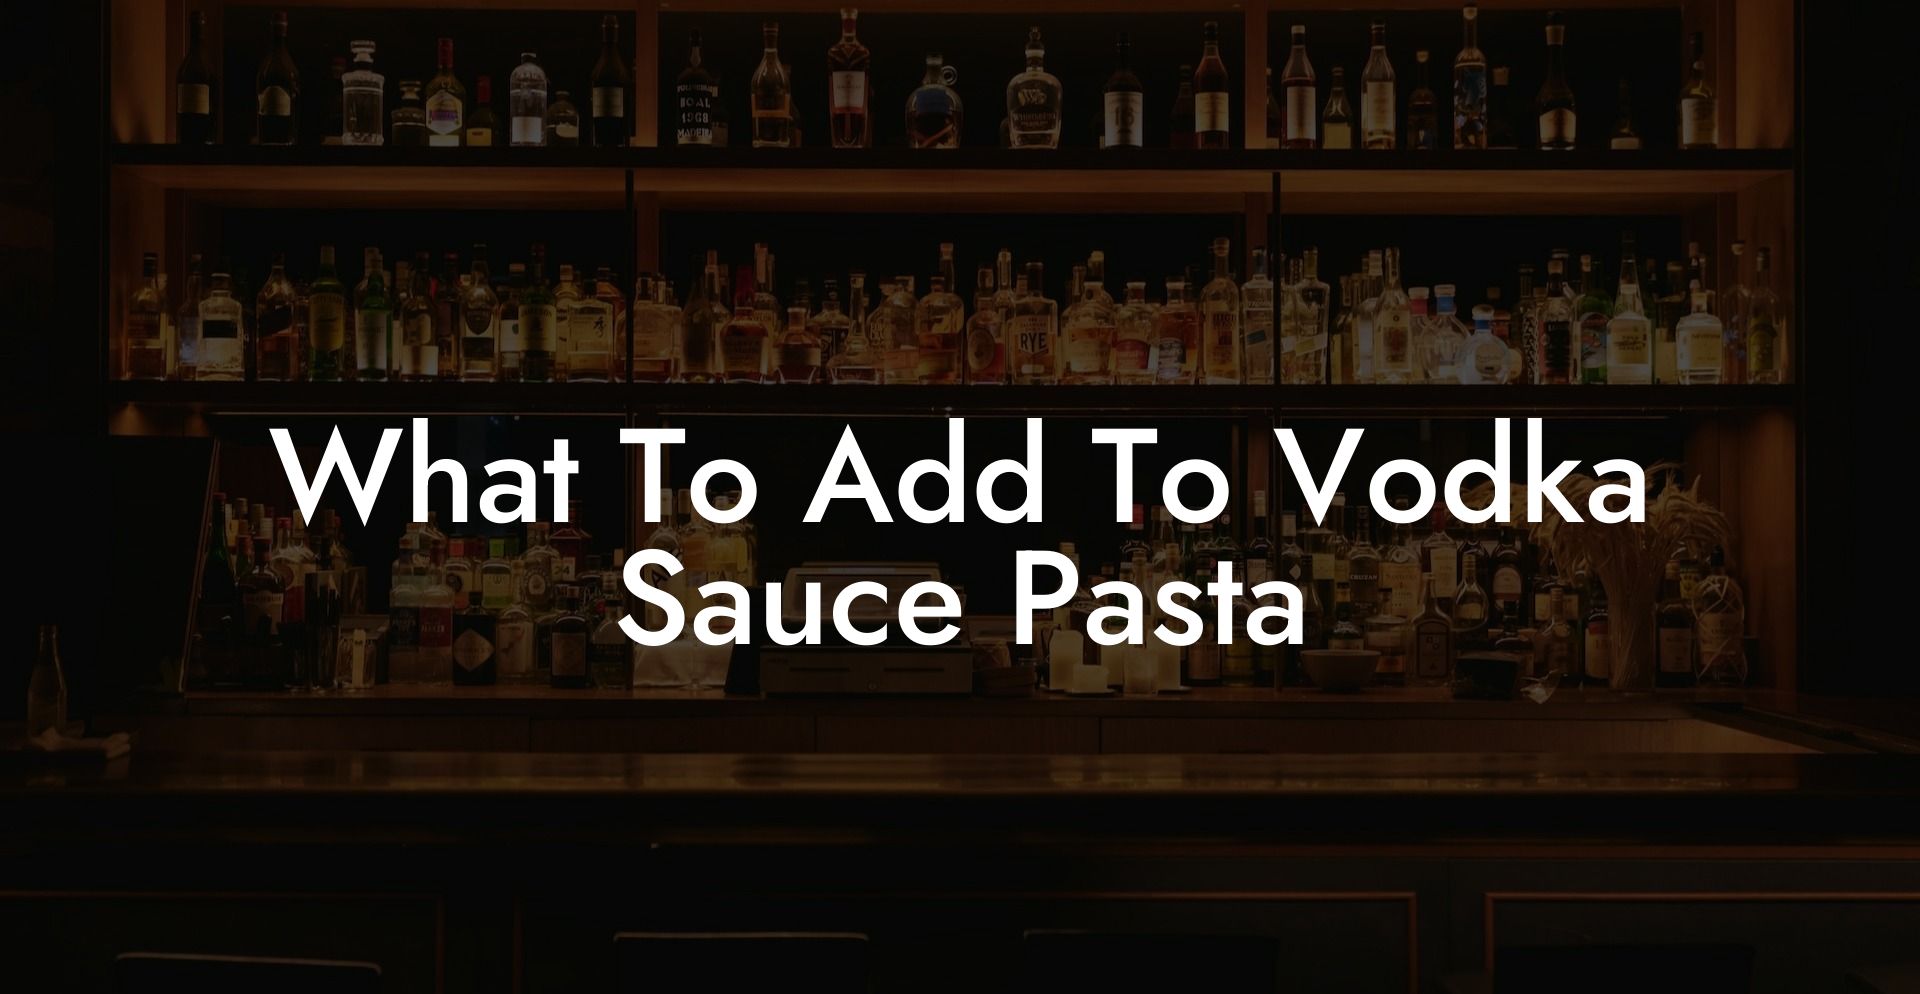 What To Add To Vodka Sauce Pasta